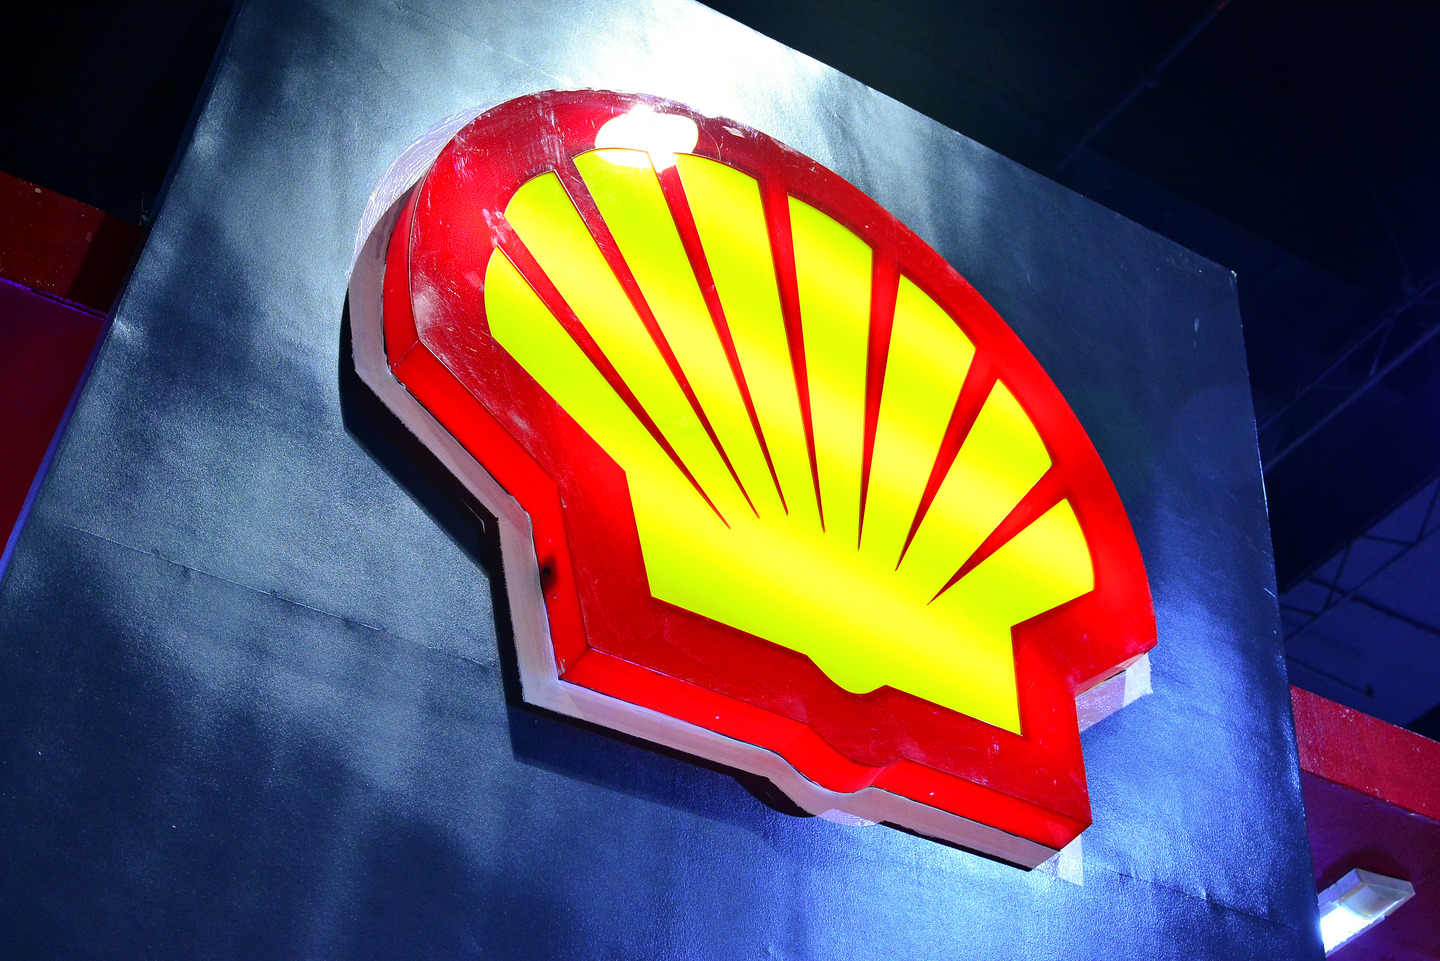 When a supply chain hack hits major companies like Shell, it's going to be big news.